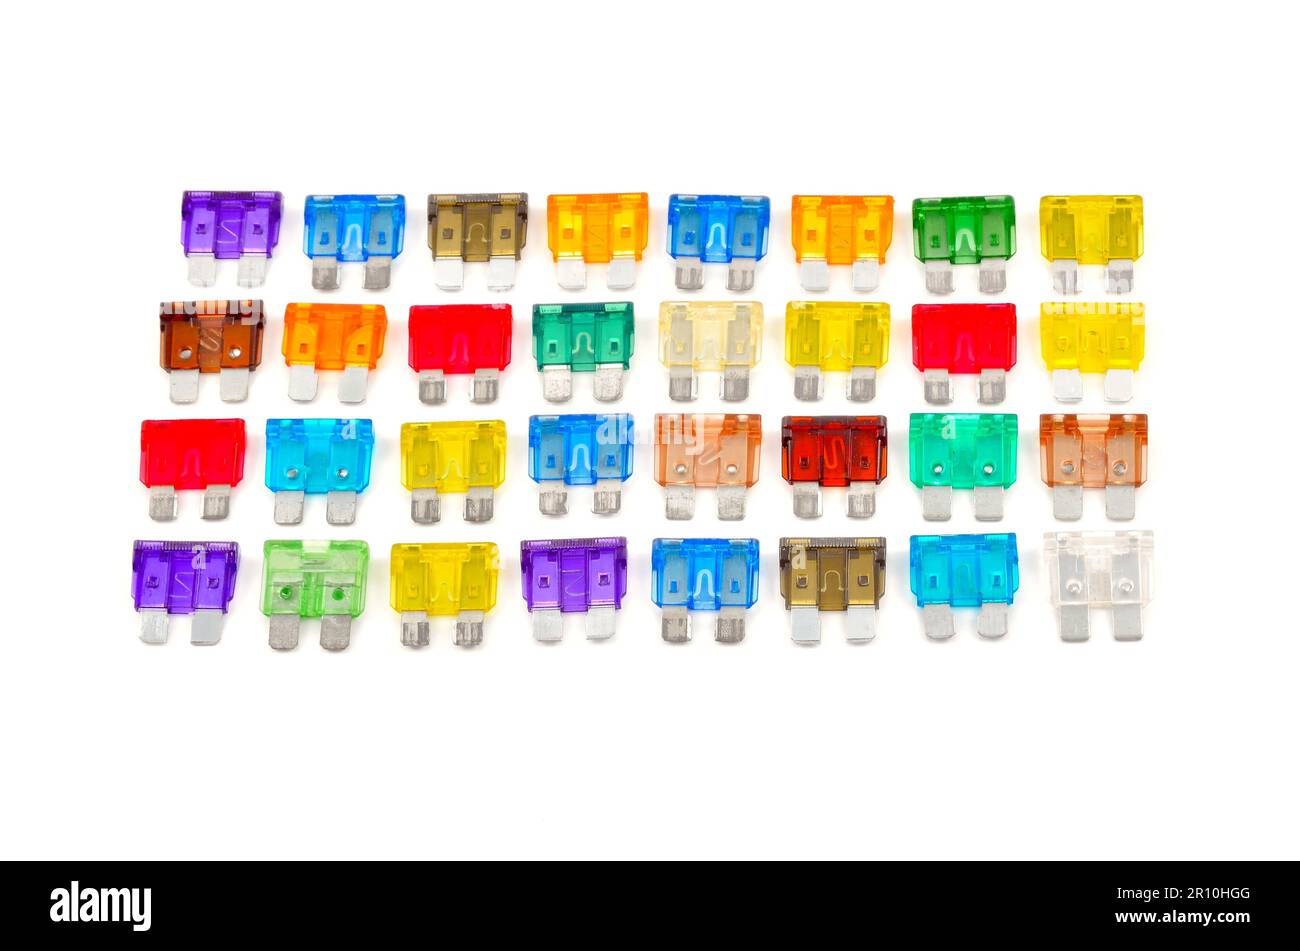 Coloe car fuse. Top view of colorful electrical automotive fuses or circuit breakers isolated on white background. Stock Photo